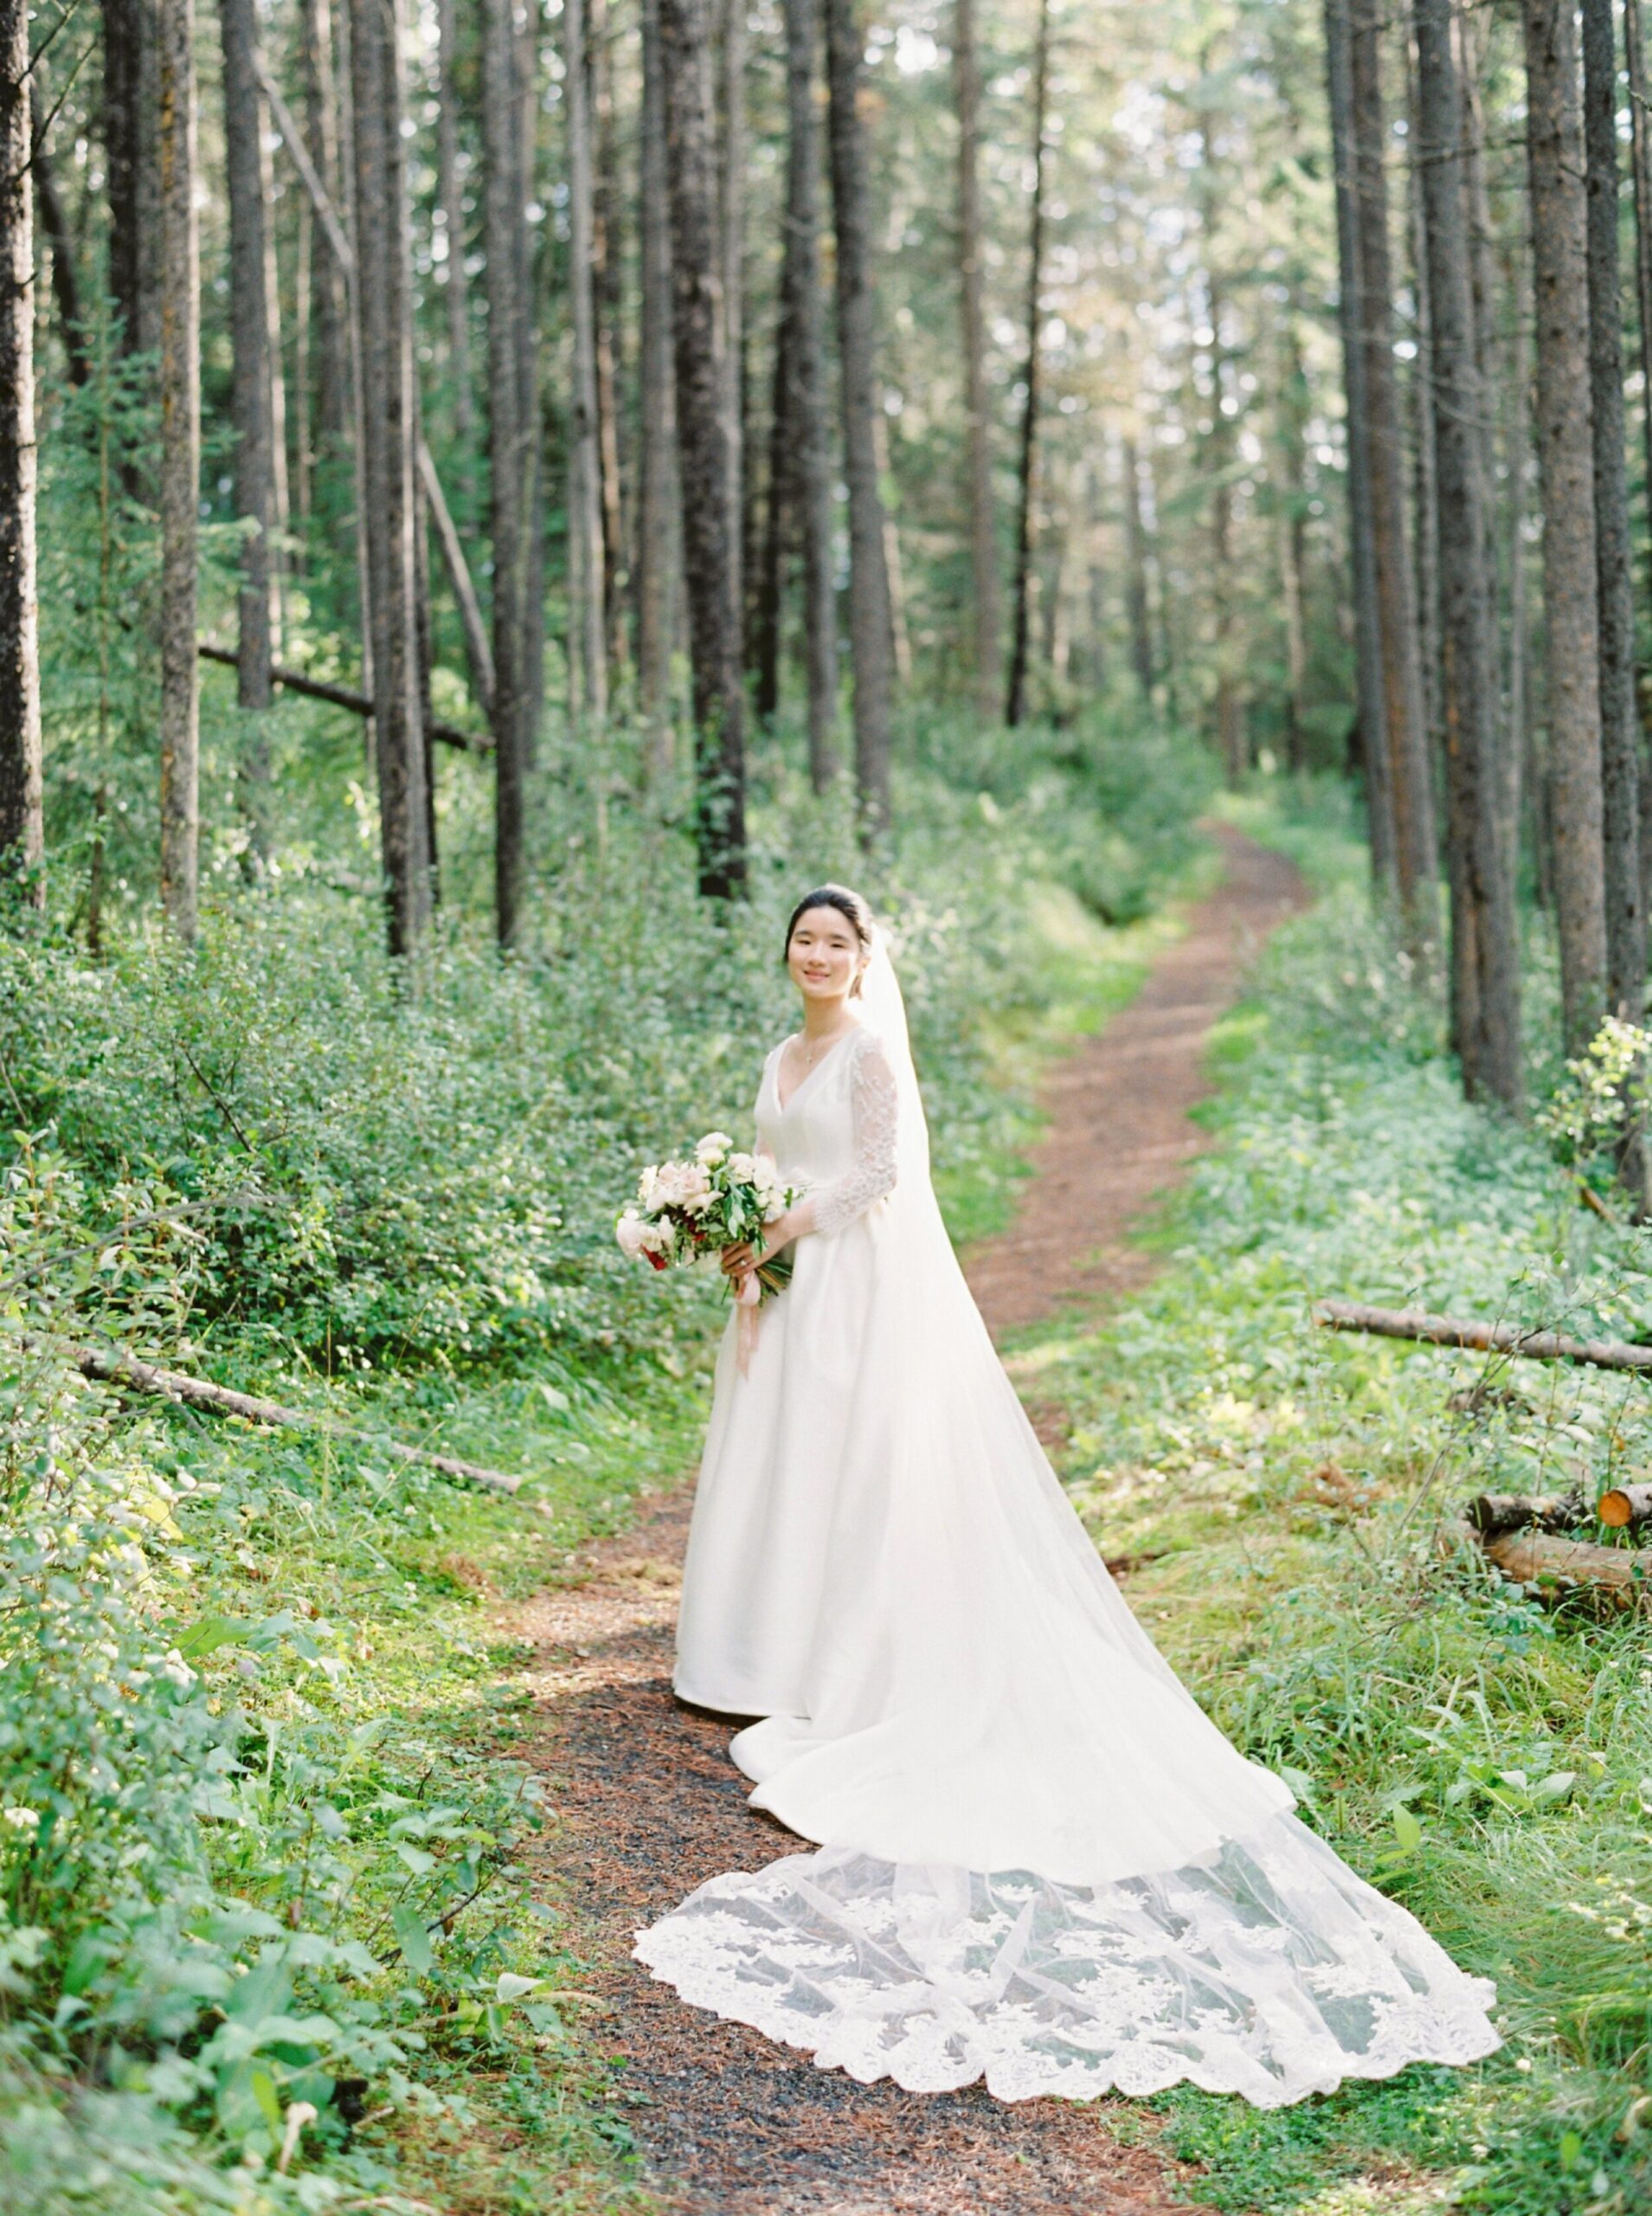  Forest mountain wedding portraits cathedral lace veil | Fairmont Banff Springs hotel wedding photographers | fine art film photography | portra 400 